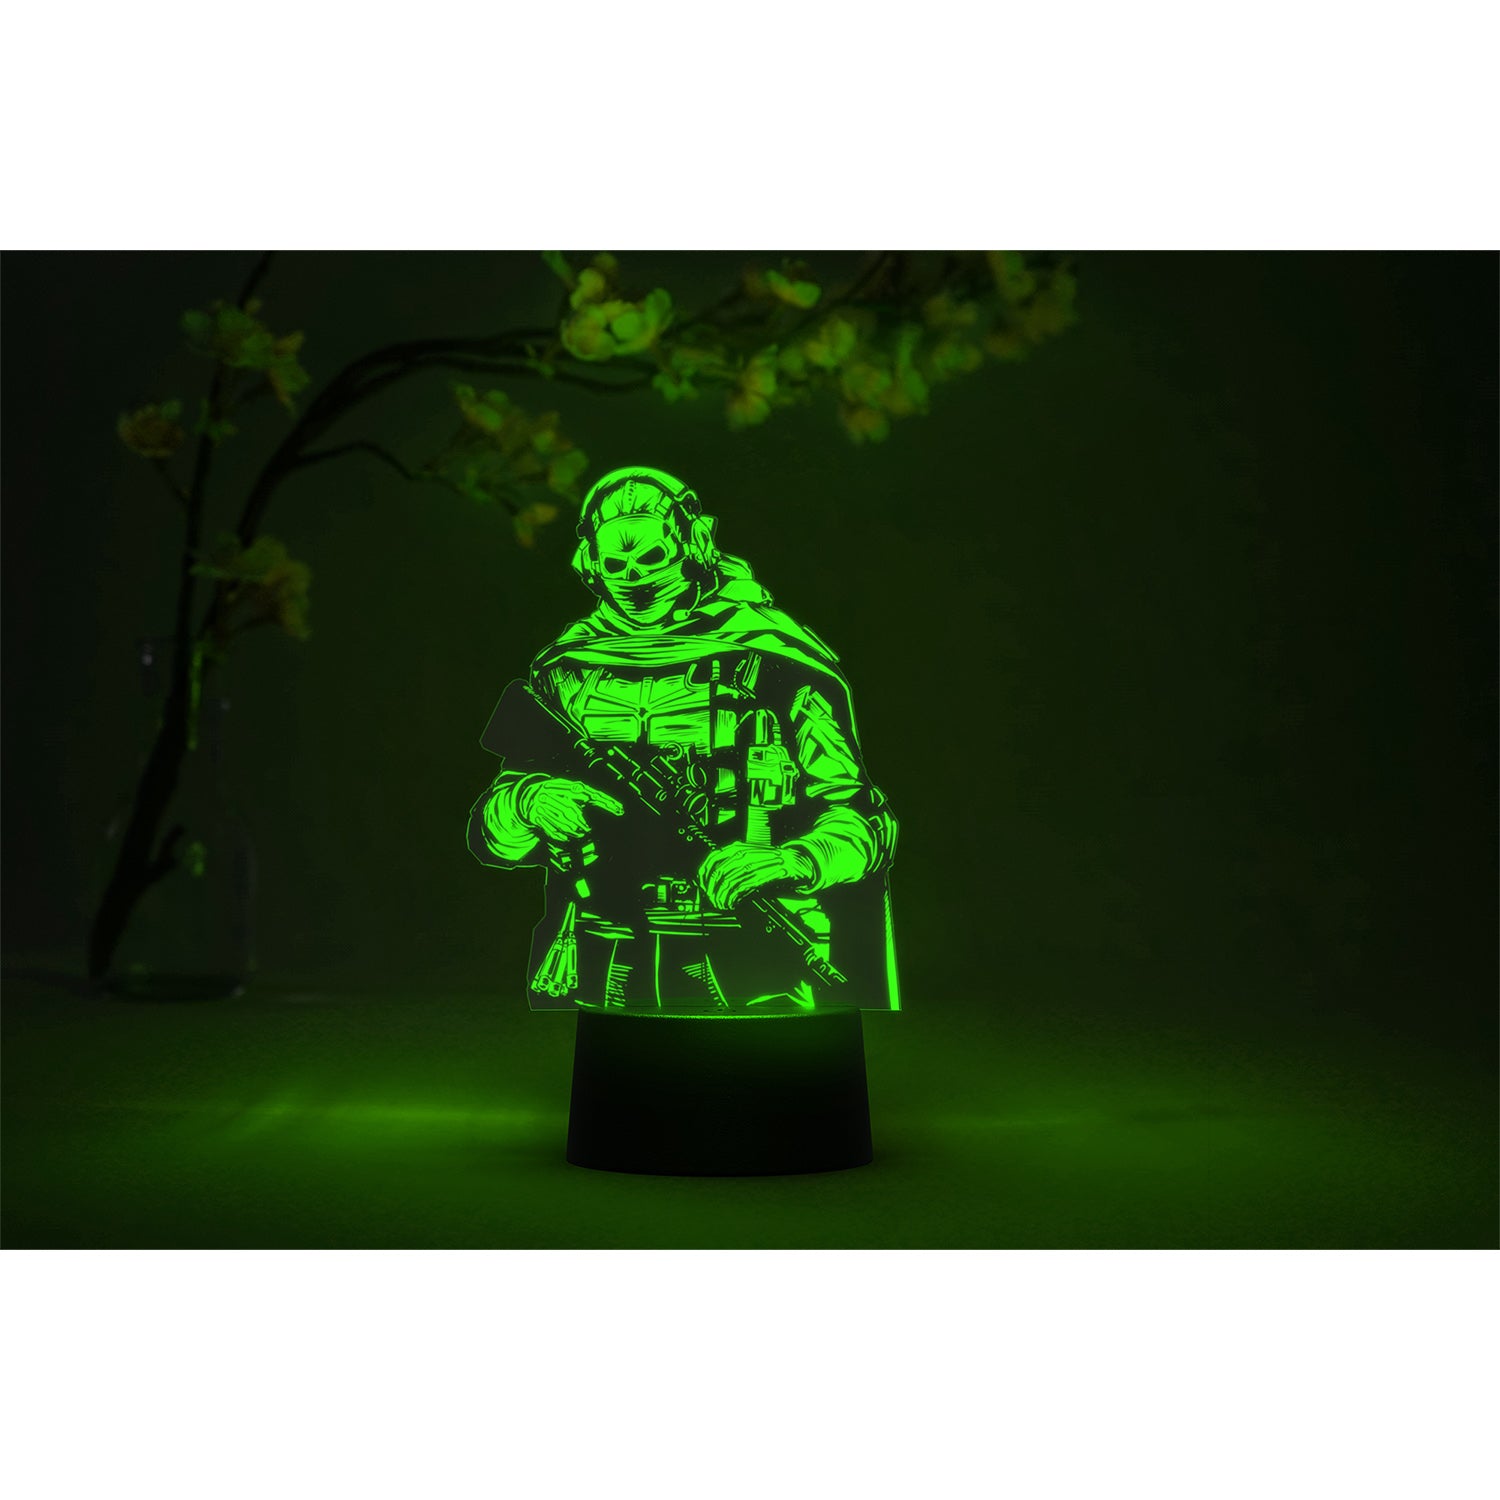 Call of Duty Ghost LED Lamp - Green